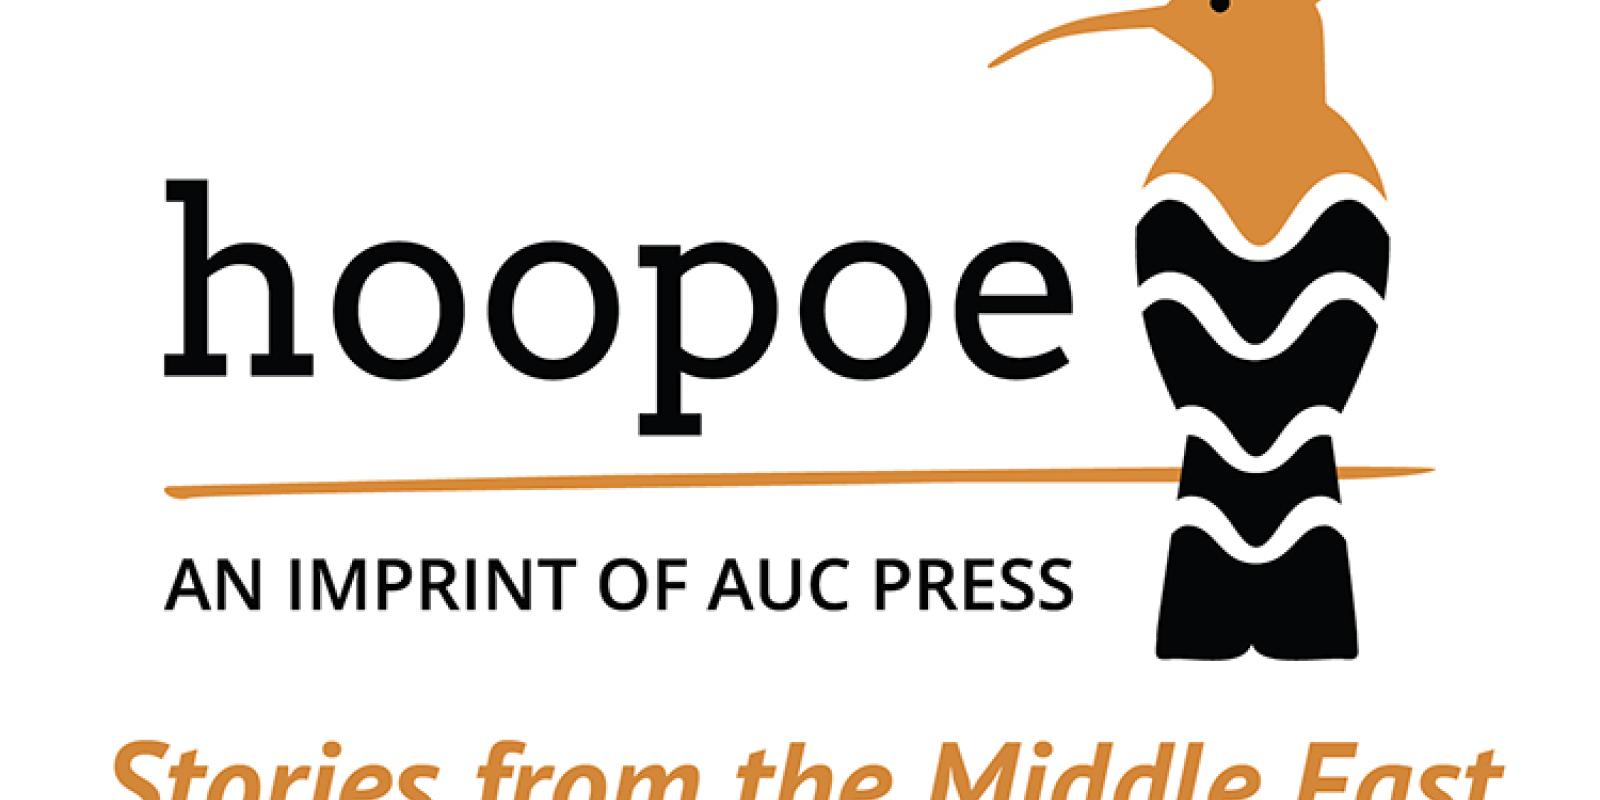 Hoopoe Fiction is a new imprint recently launched by the AUC Press.